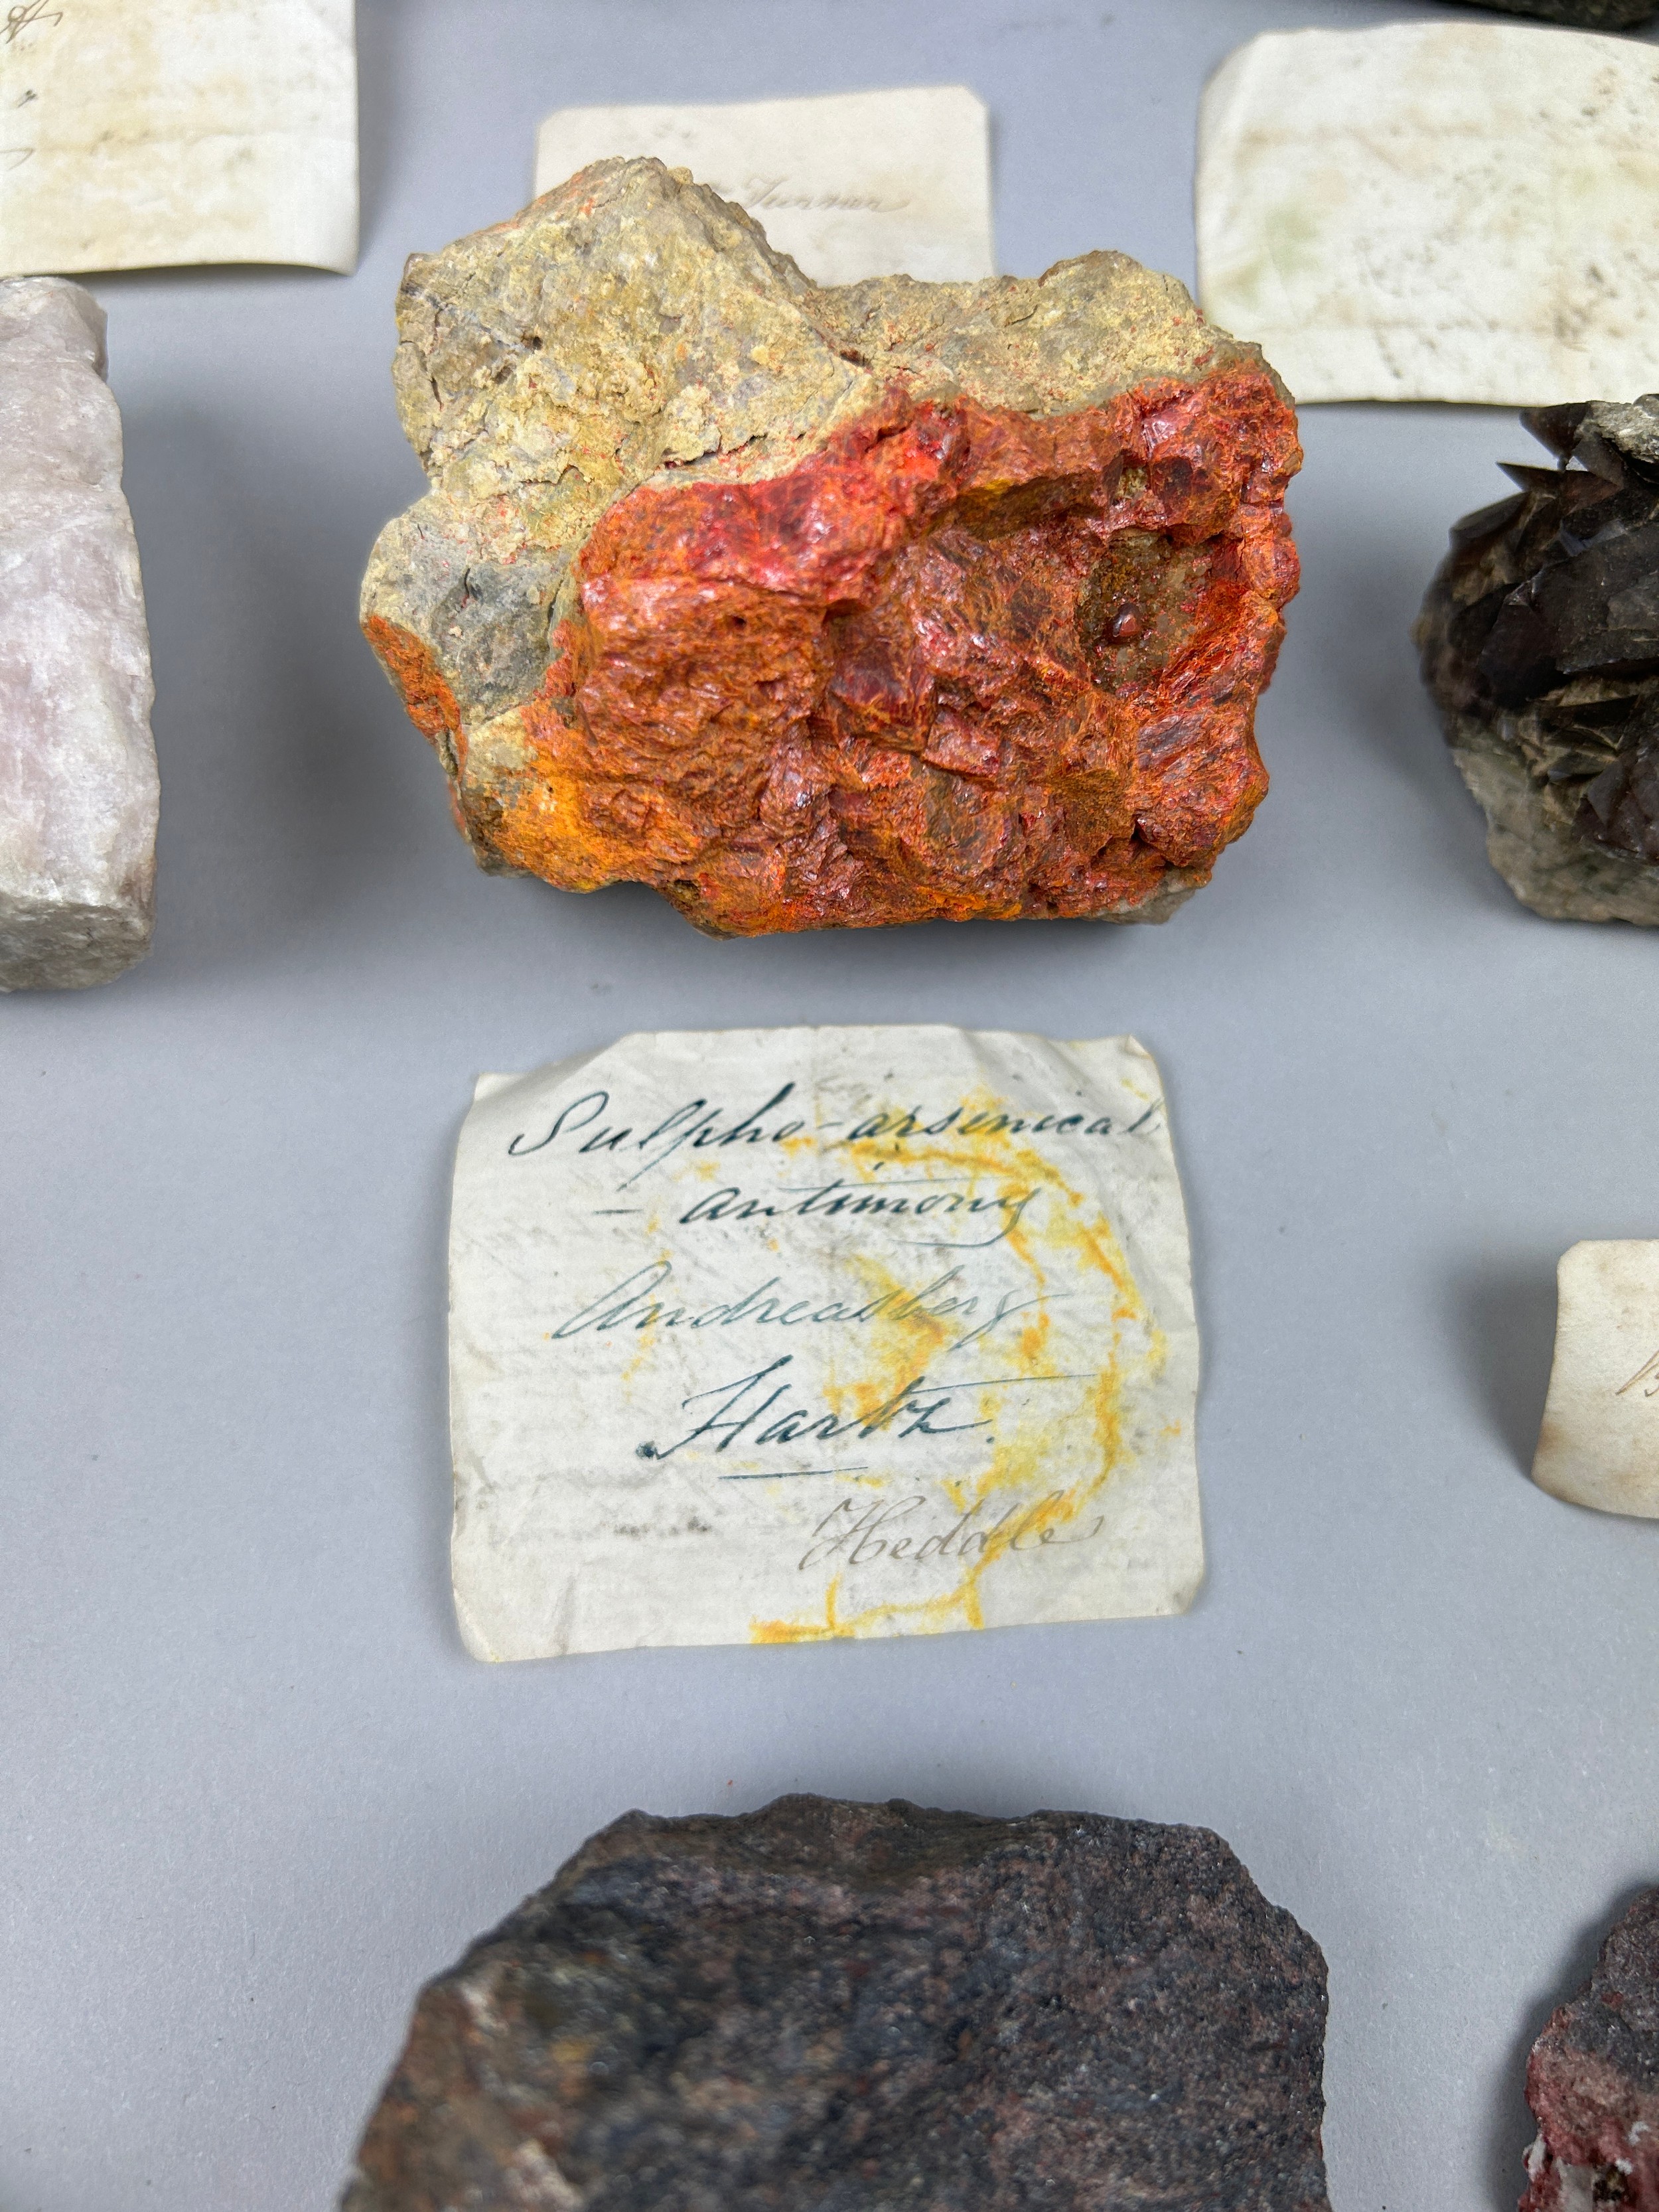 A RARE CABINET COLLECTION OF MINERALS CIRCA 1810-1860, including labels for some very important - Image 12 of 30